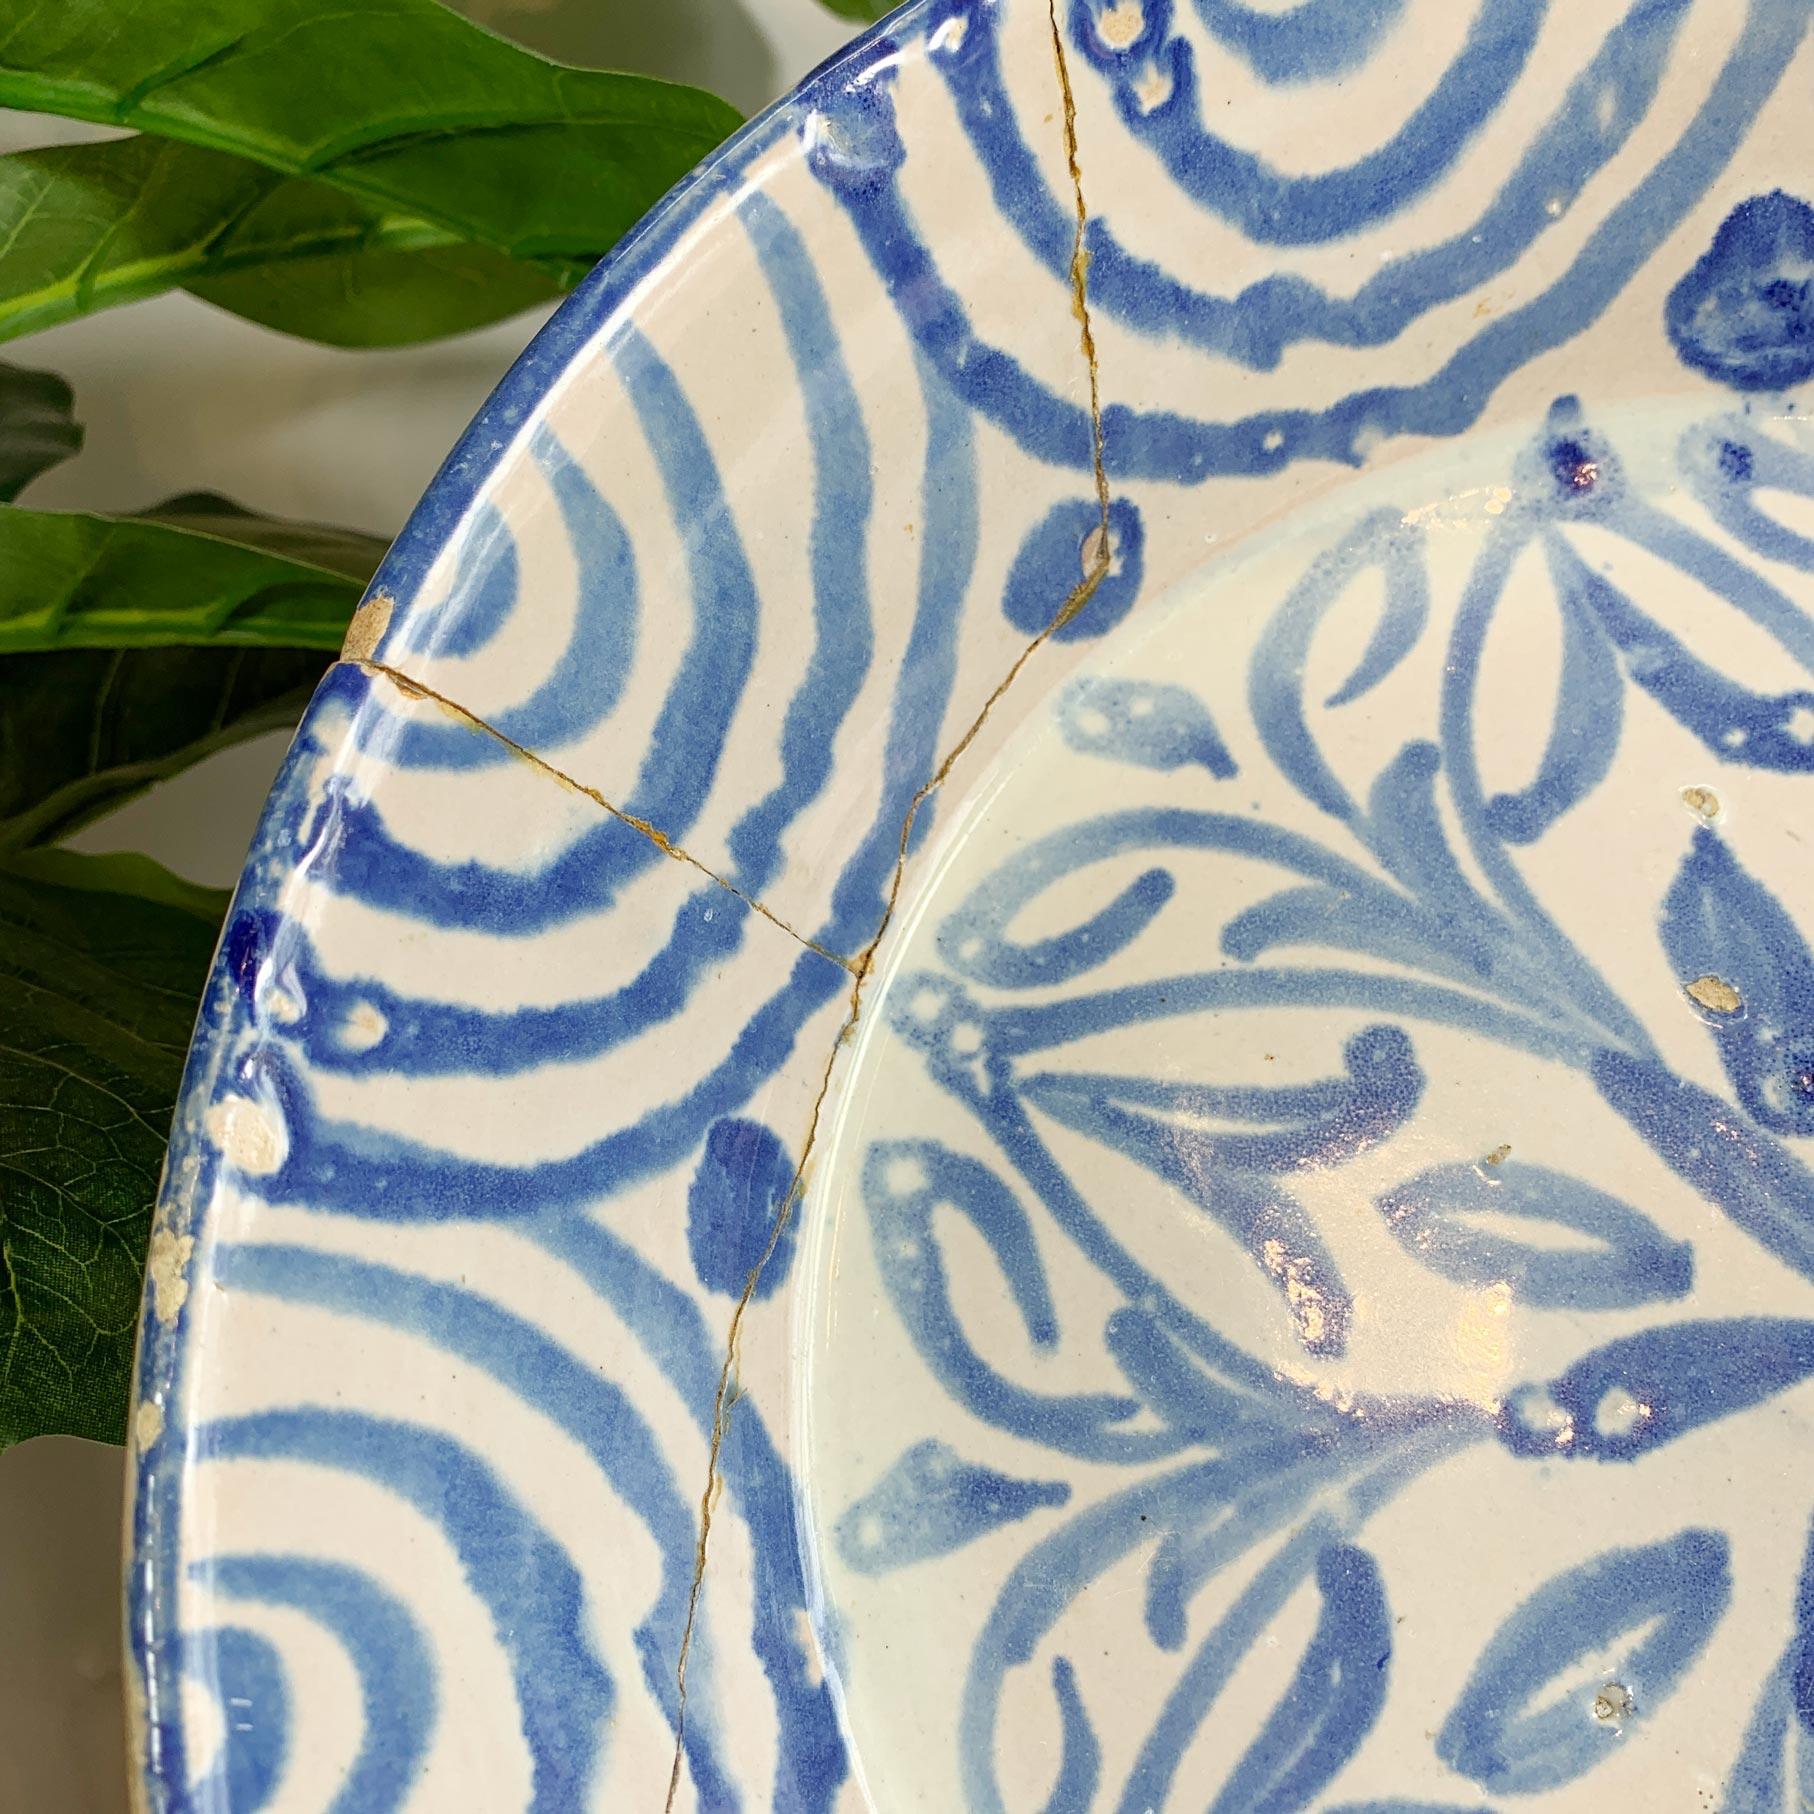 Late 18th Century Large 18th C Blue and White Spanish Lebrillo Bowl For Sale